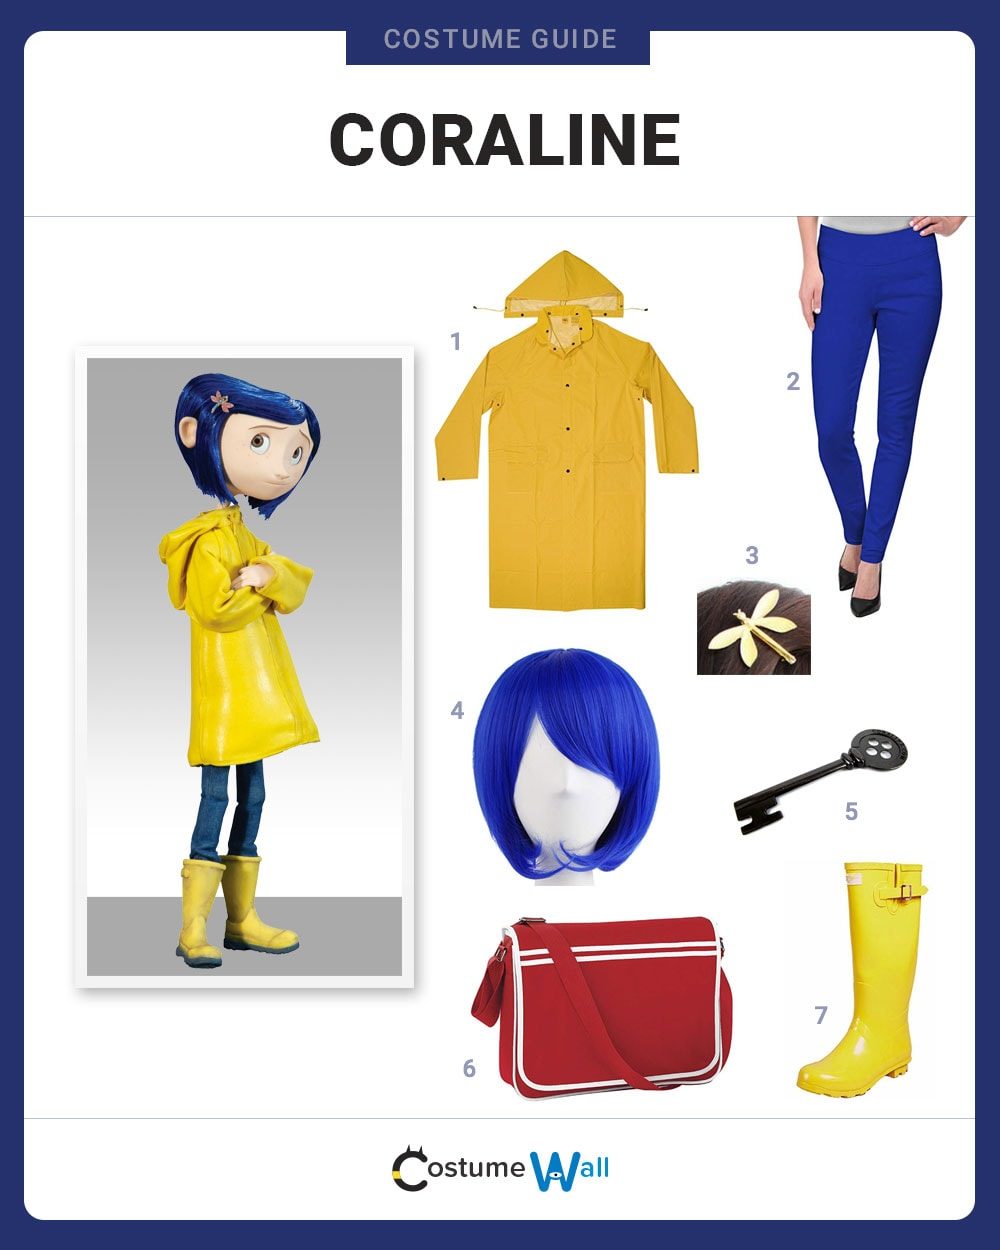 Morning gas Quickly Dress Like Coraline Costume | Halloween and Cosplay Guides